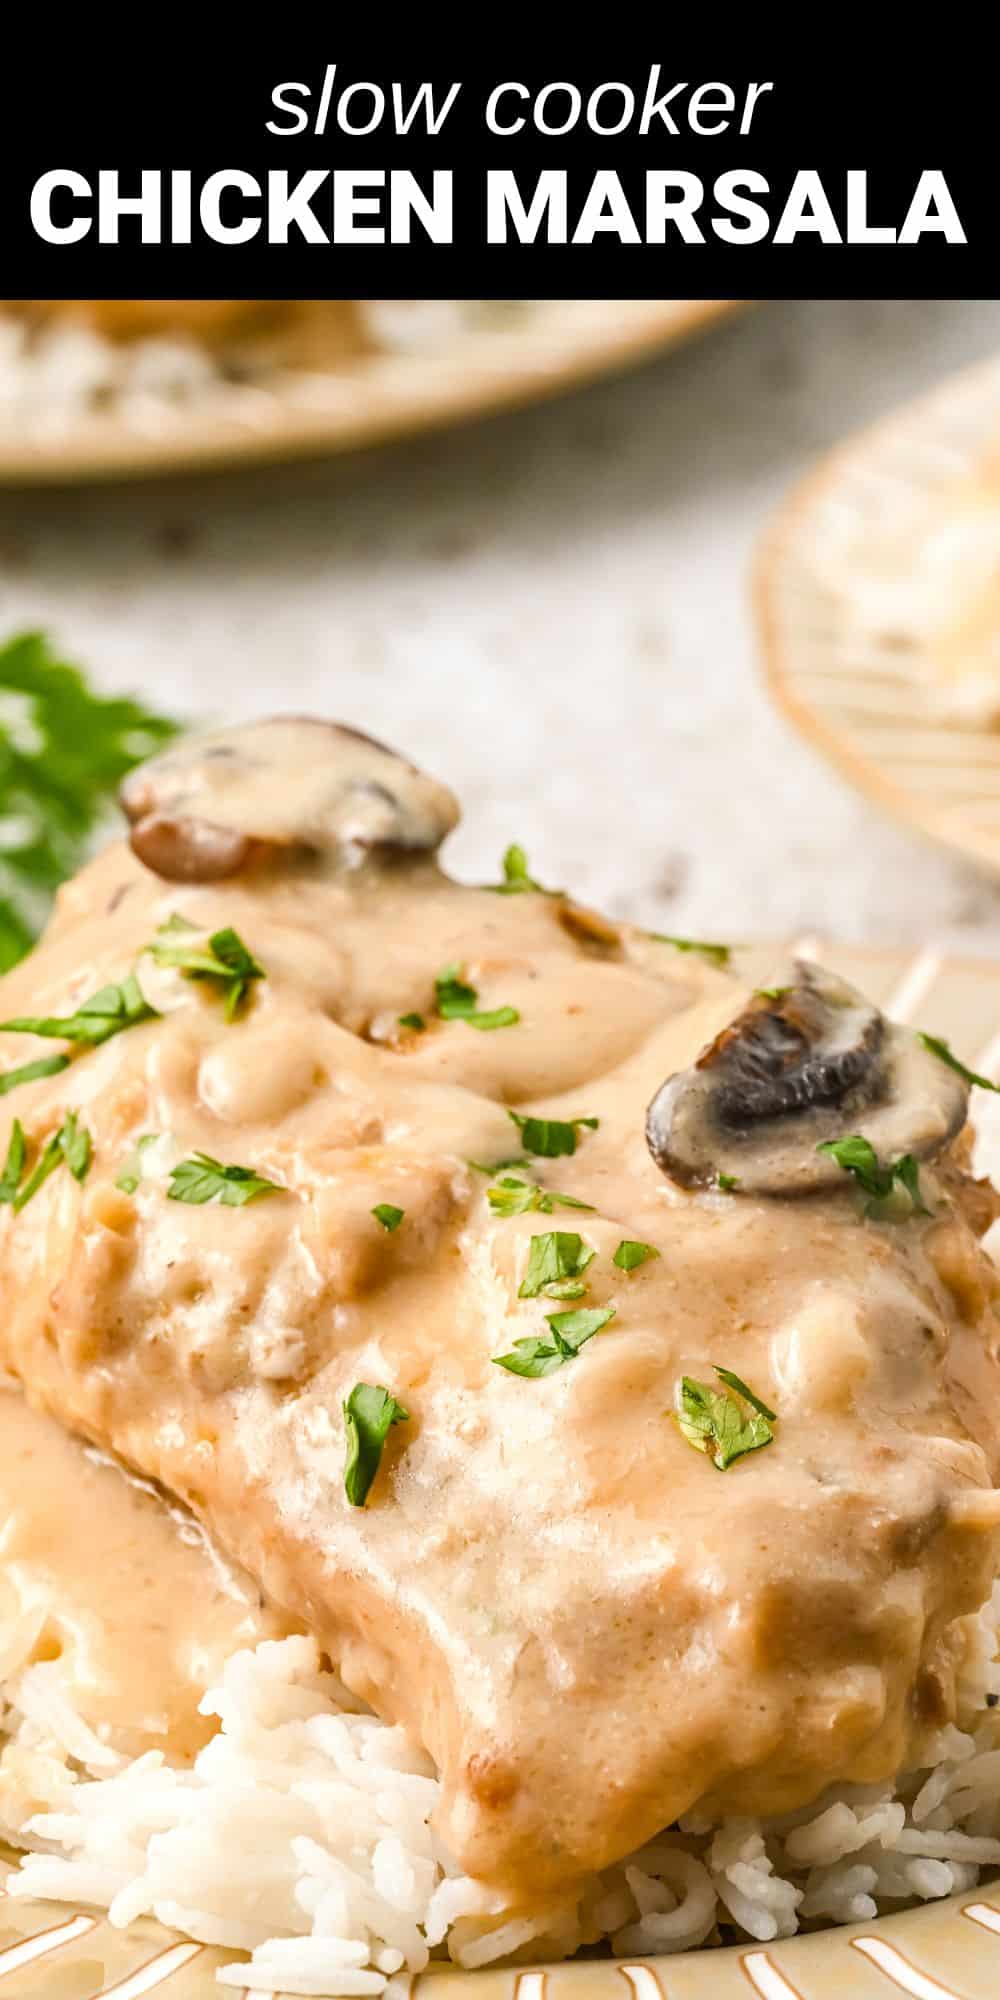 This simple recipe for delicious Slow Cooker Chicken Marsala features tender chicken breasts smothered in a creamy and flavorful mushroom sauce. And the best part is, the slow cooker does most of the work for you, making it perfect for a busy weeknight dinner.